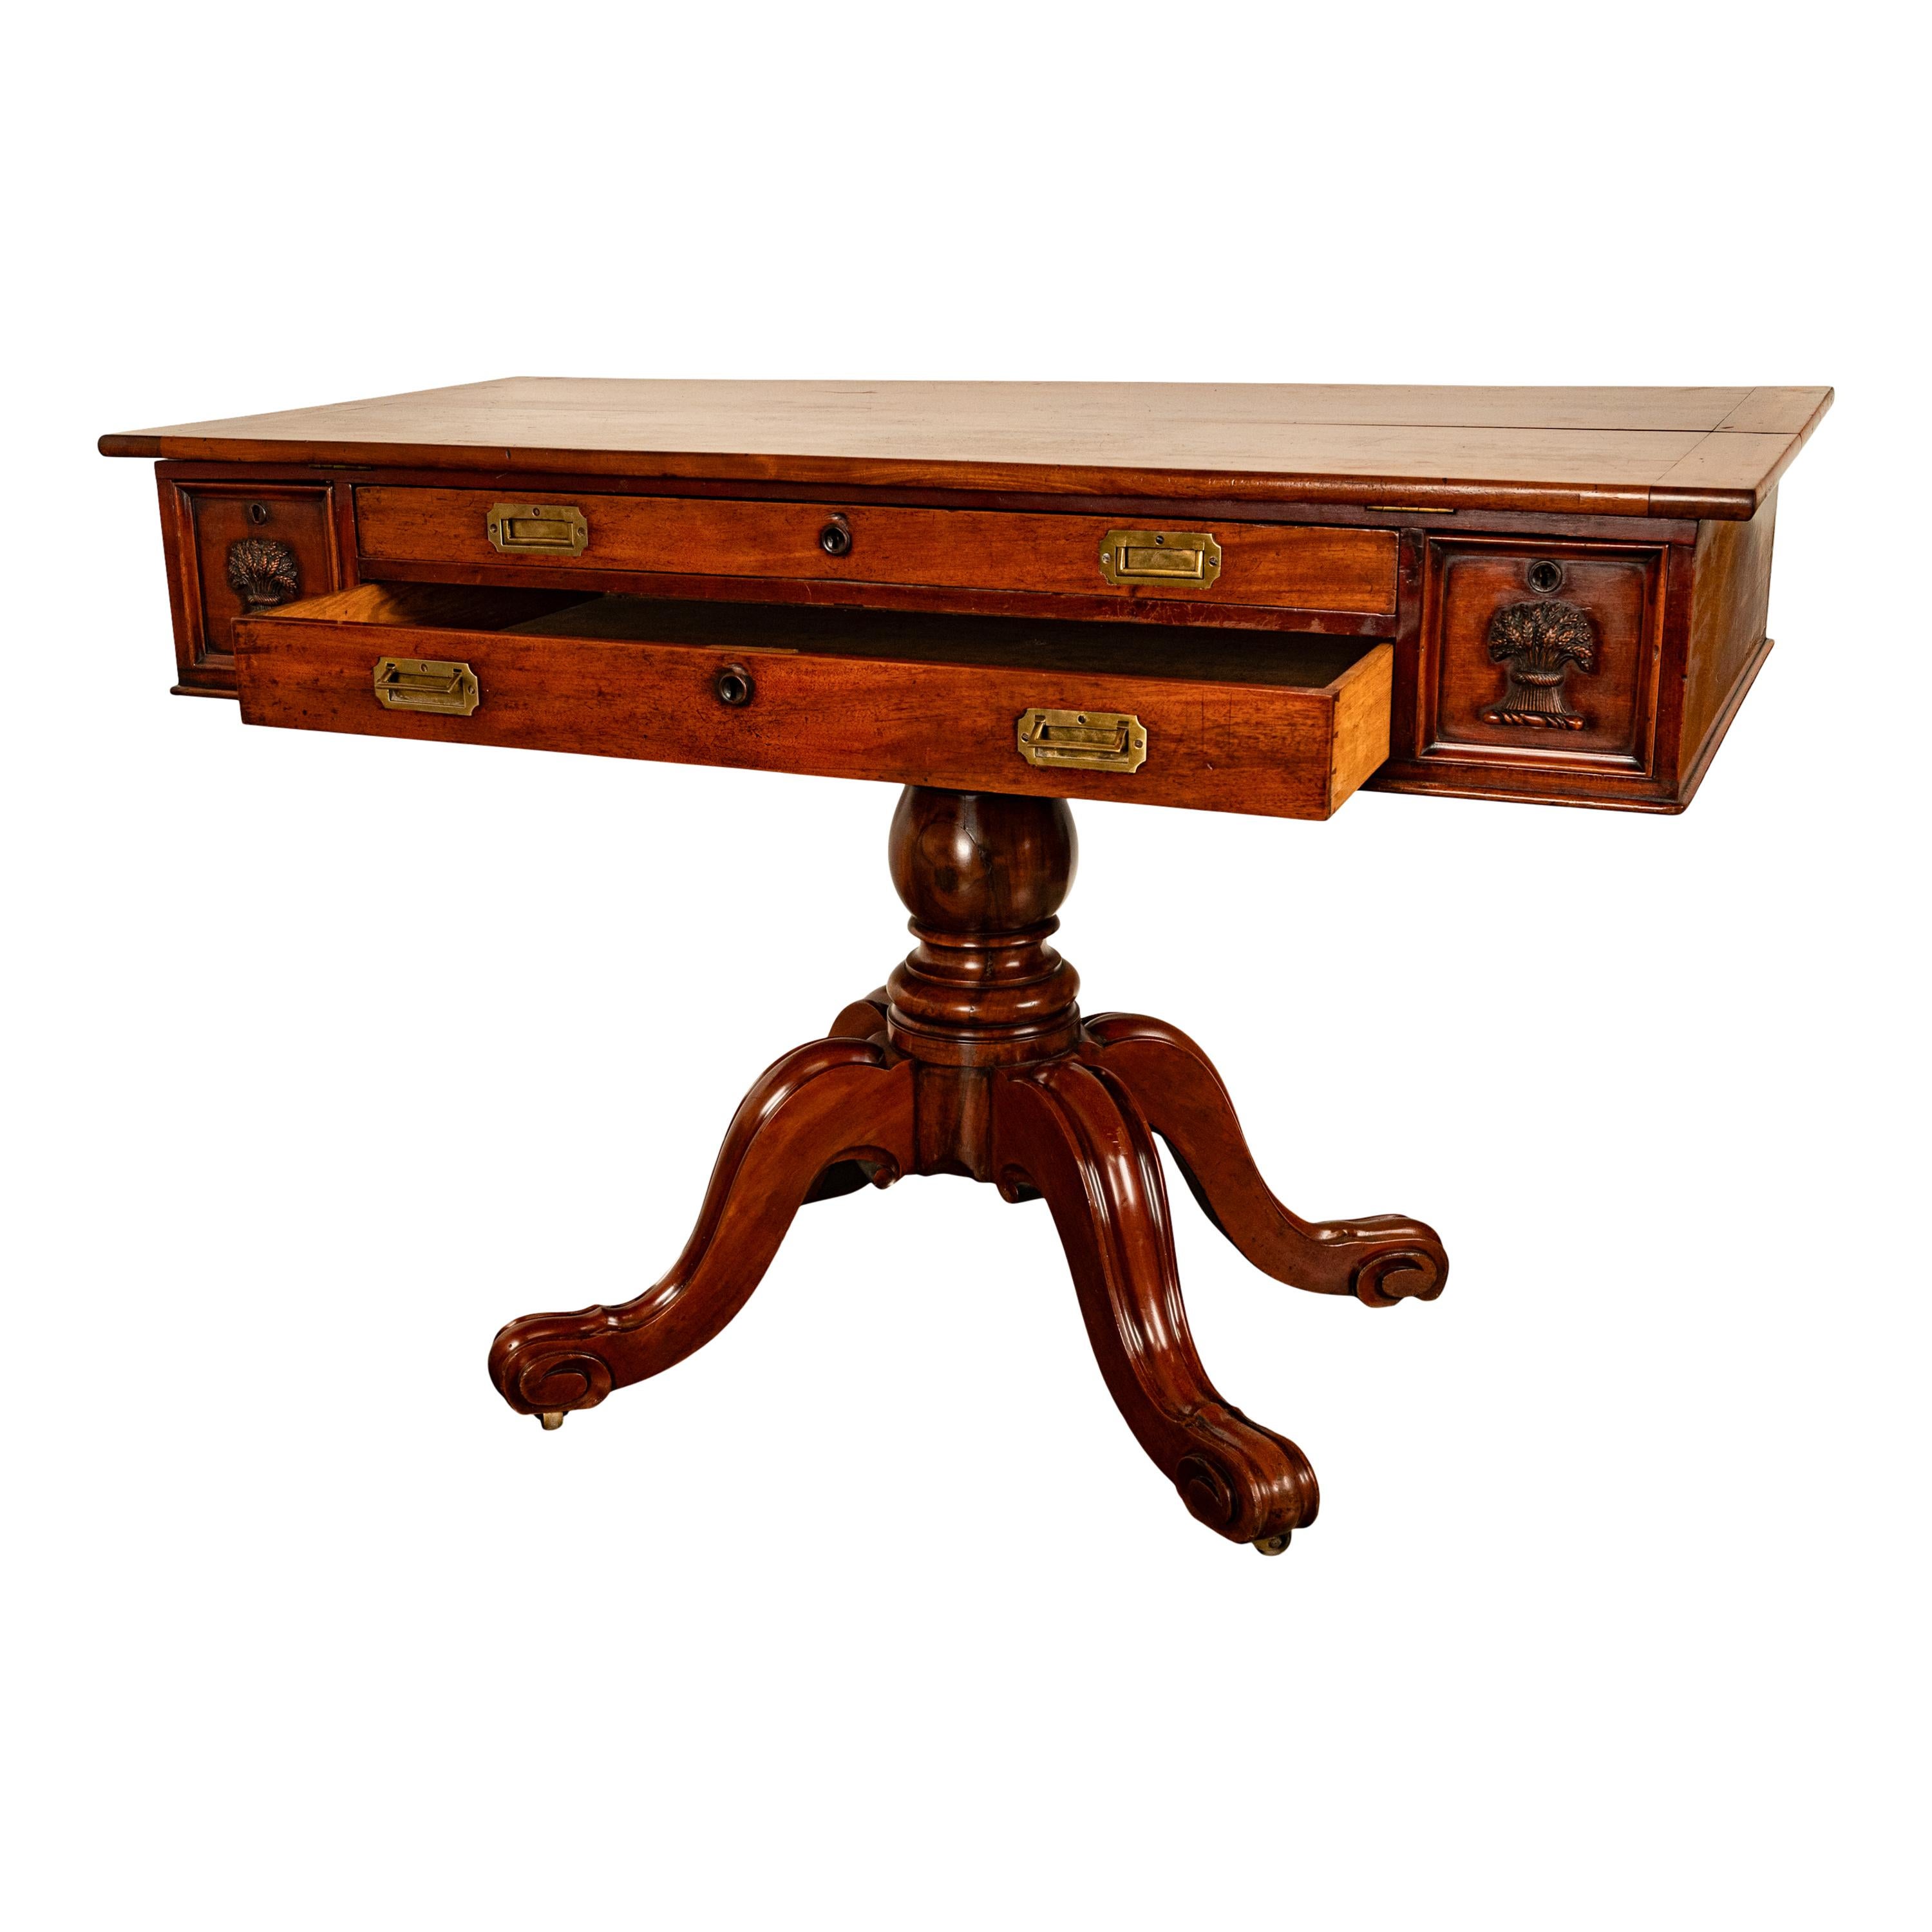 Antique 19th Century Architect's Mahogany Pedestal Desk Drafting Table 1870 For Sale 2